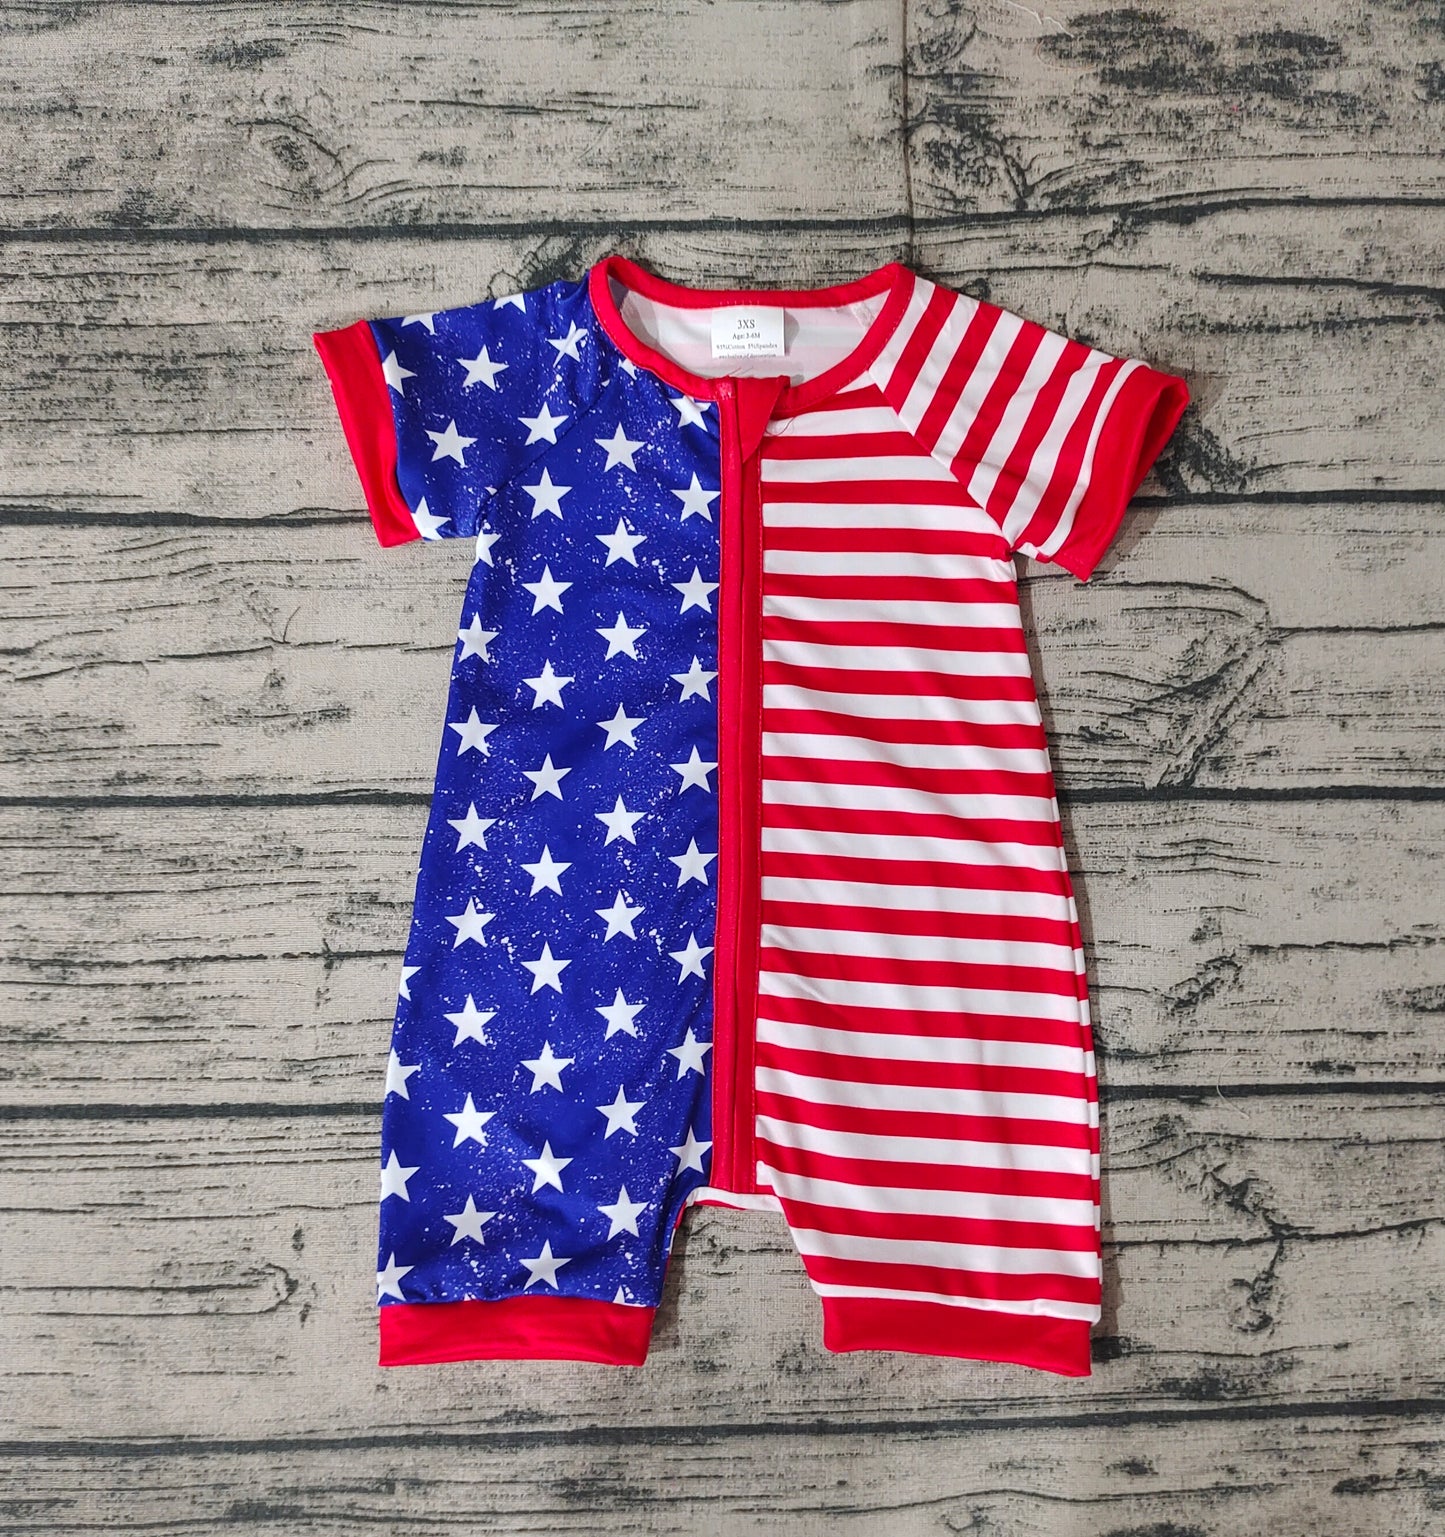 Baby Infant Boys Toddler 4th Of July Star Red Stripes Short Sleeve Rompers